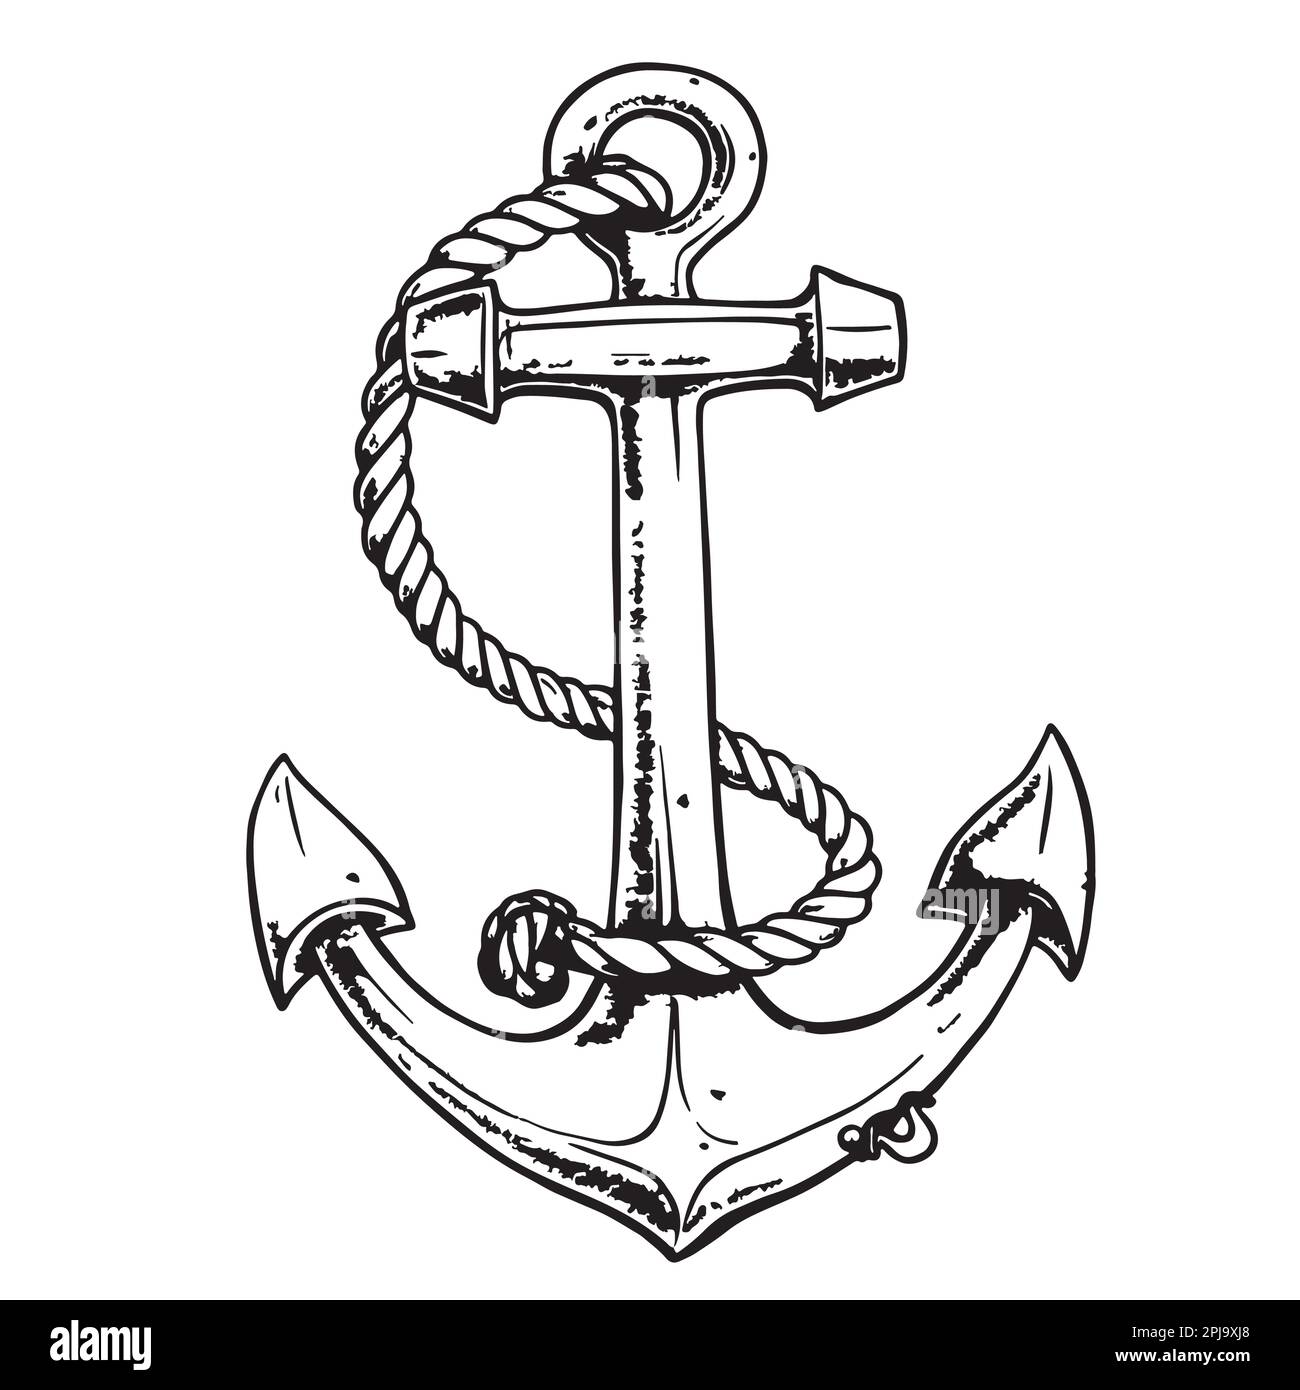 Anchor with rope hand drawn sketch illustration Stock Vector Image ...